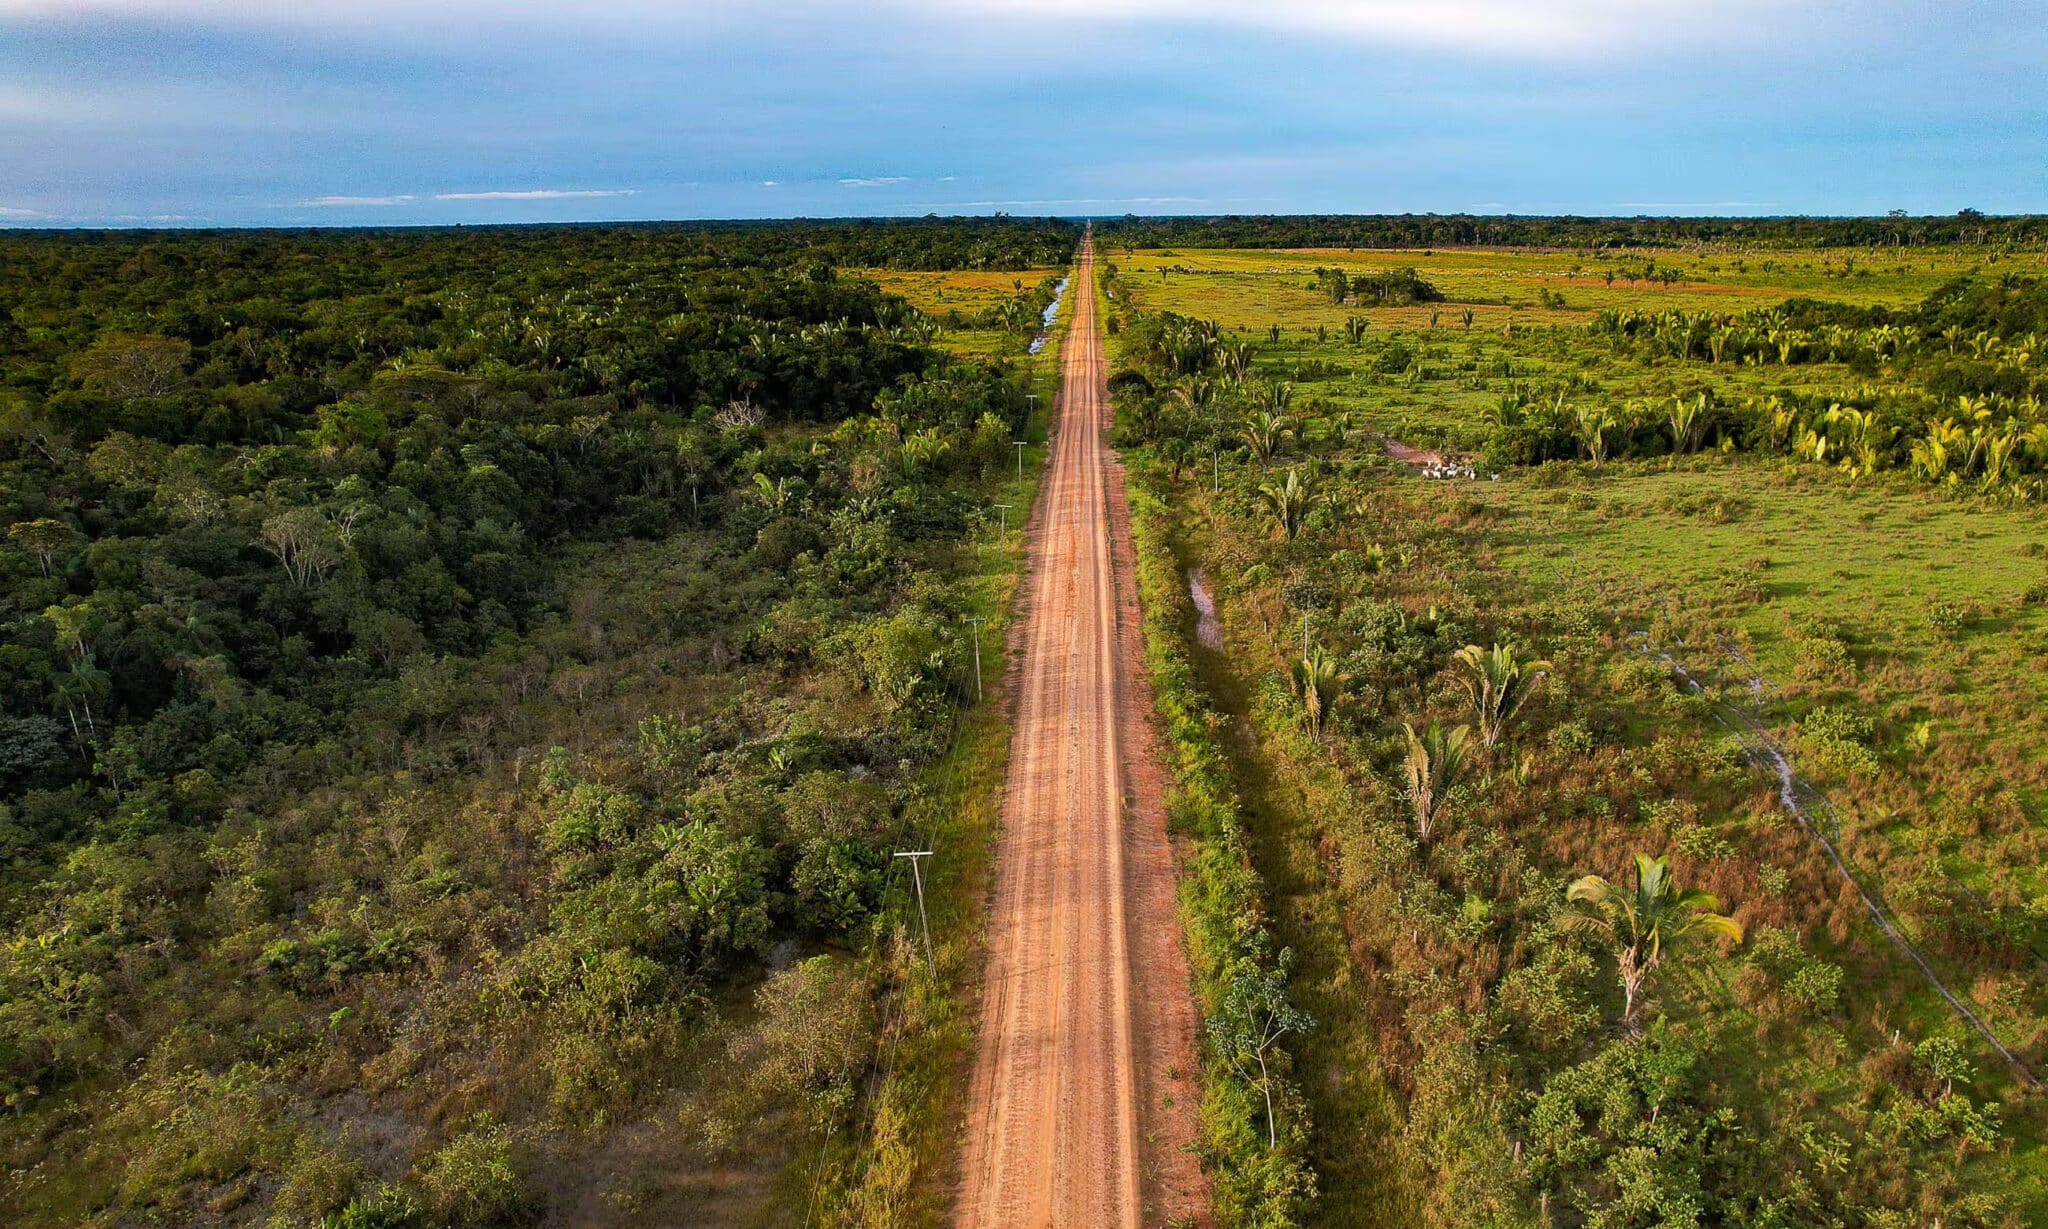 An unpaved stretch of Brazil’s BR-319 between Humaitá and Porto Realidade